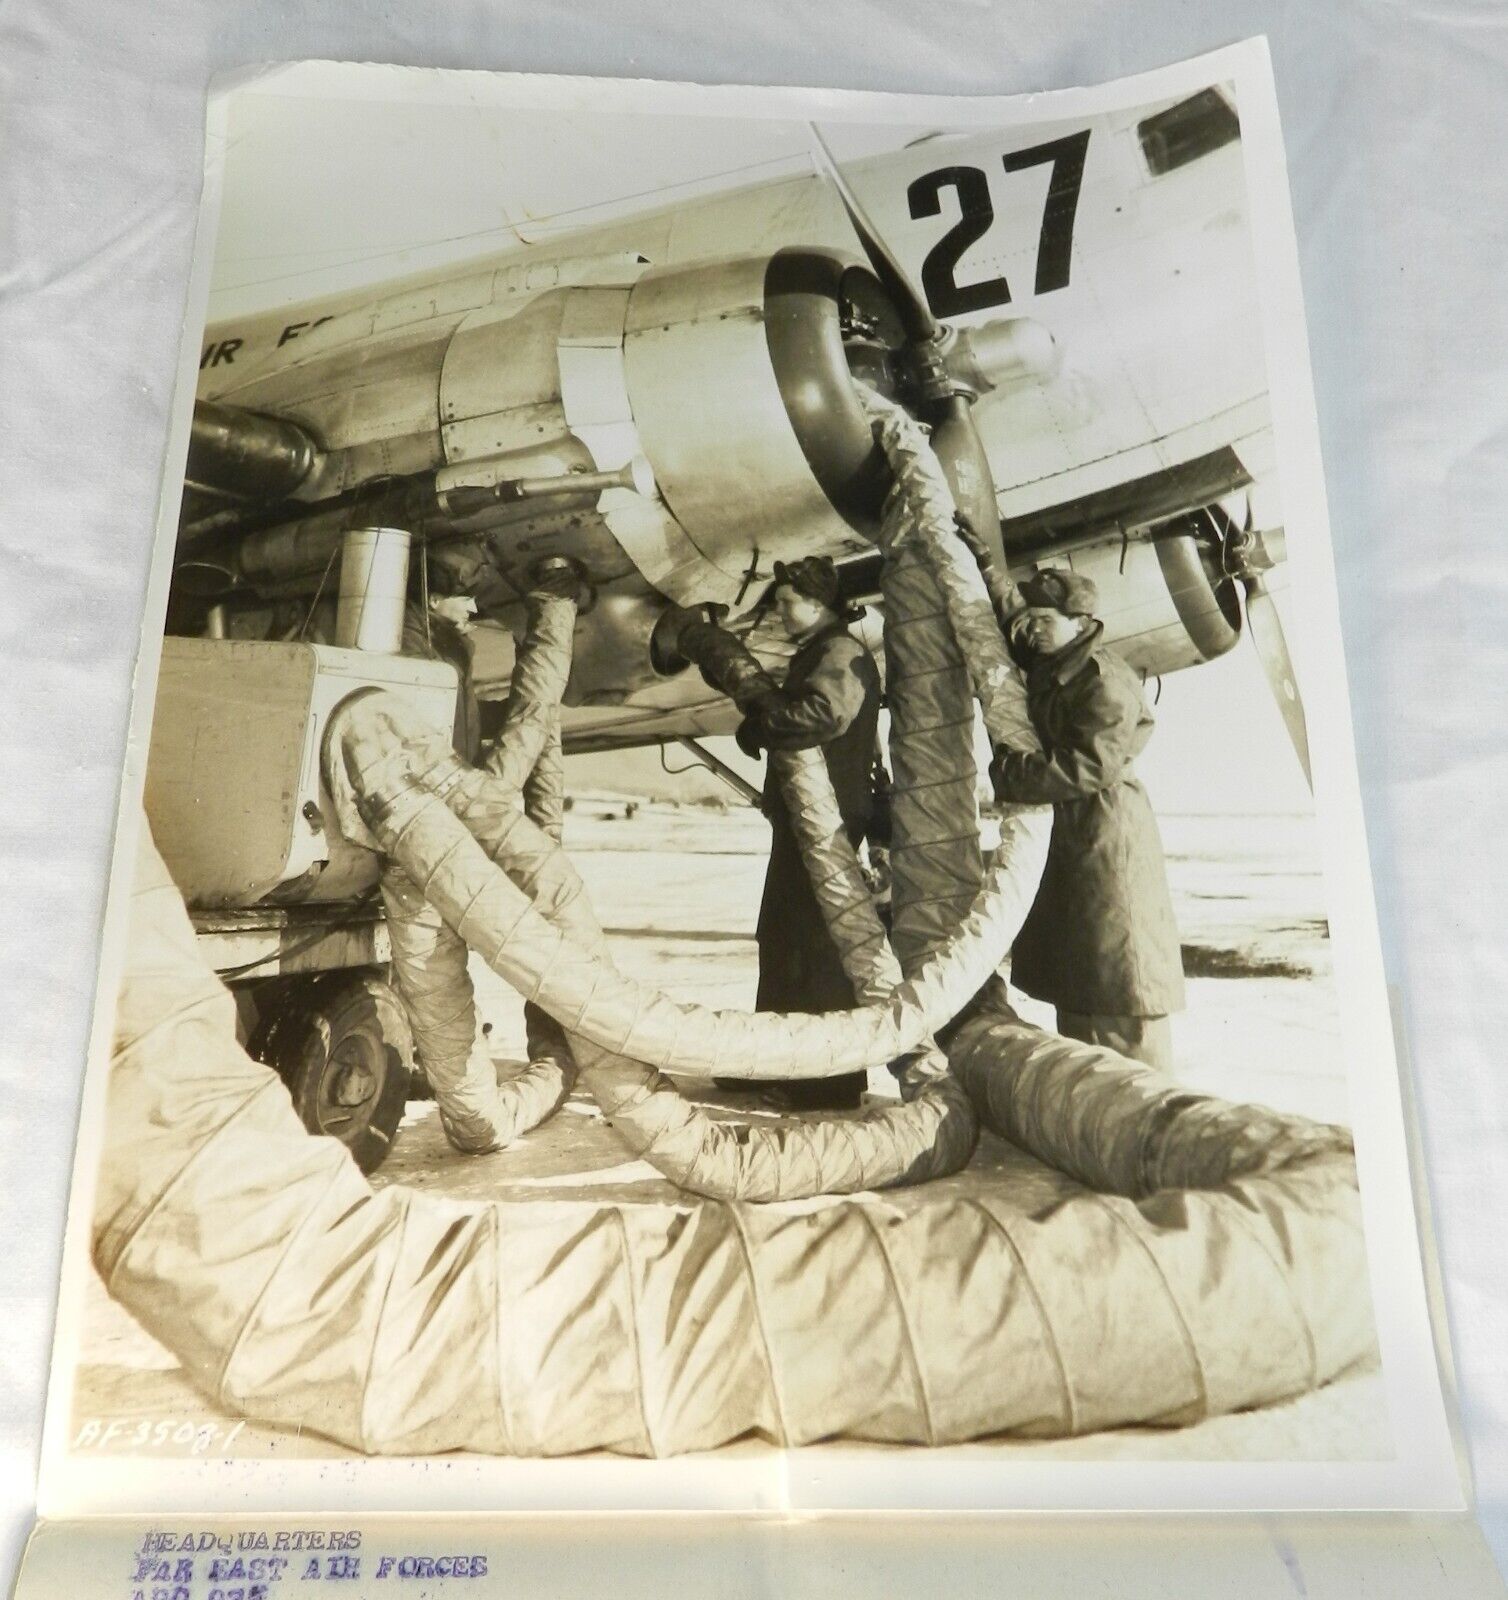 Vintage 1953 US Air Force Press Photo - Pre-Heating Plane for Takeoff, Japan